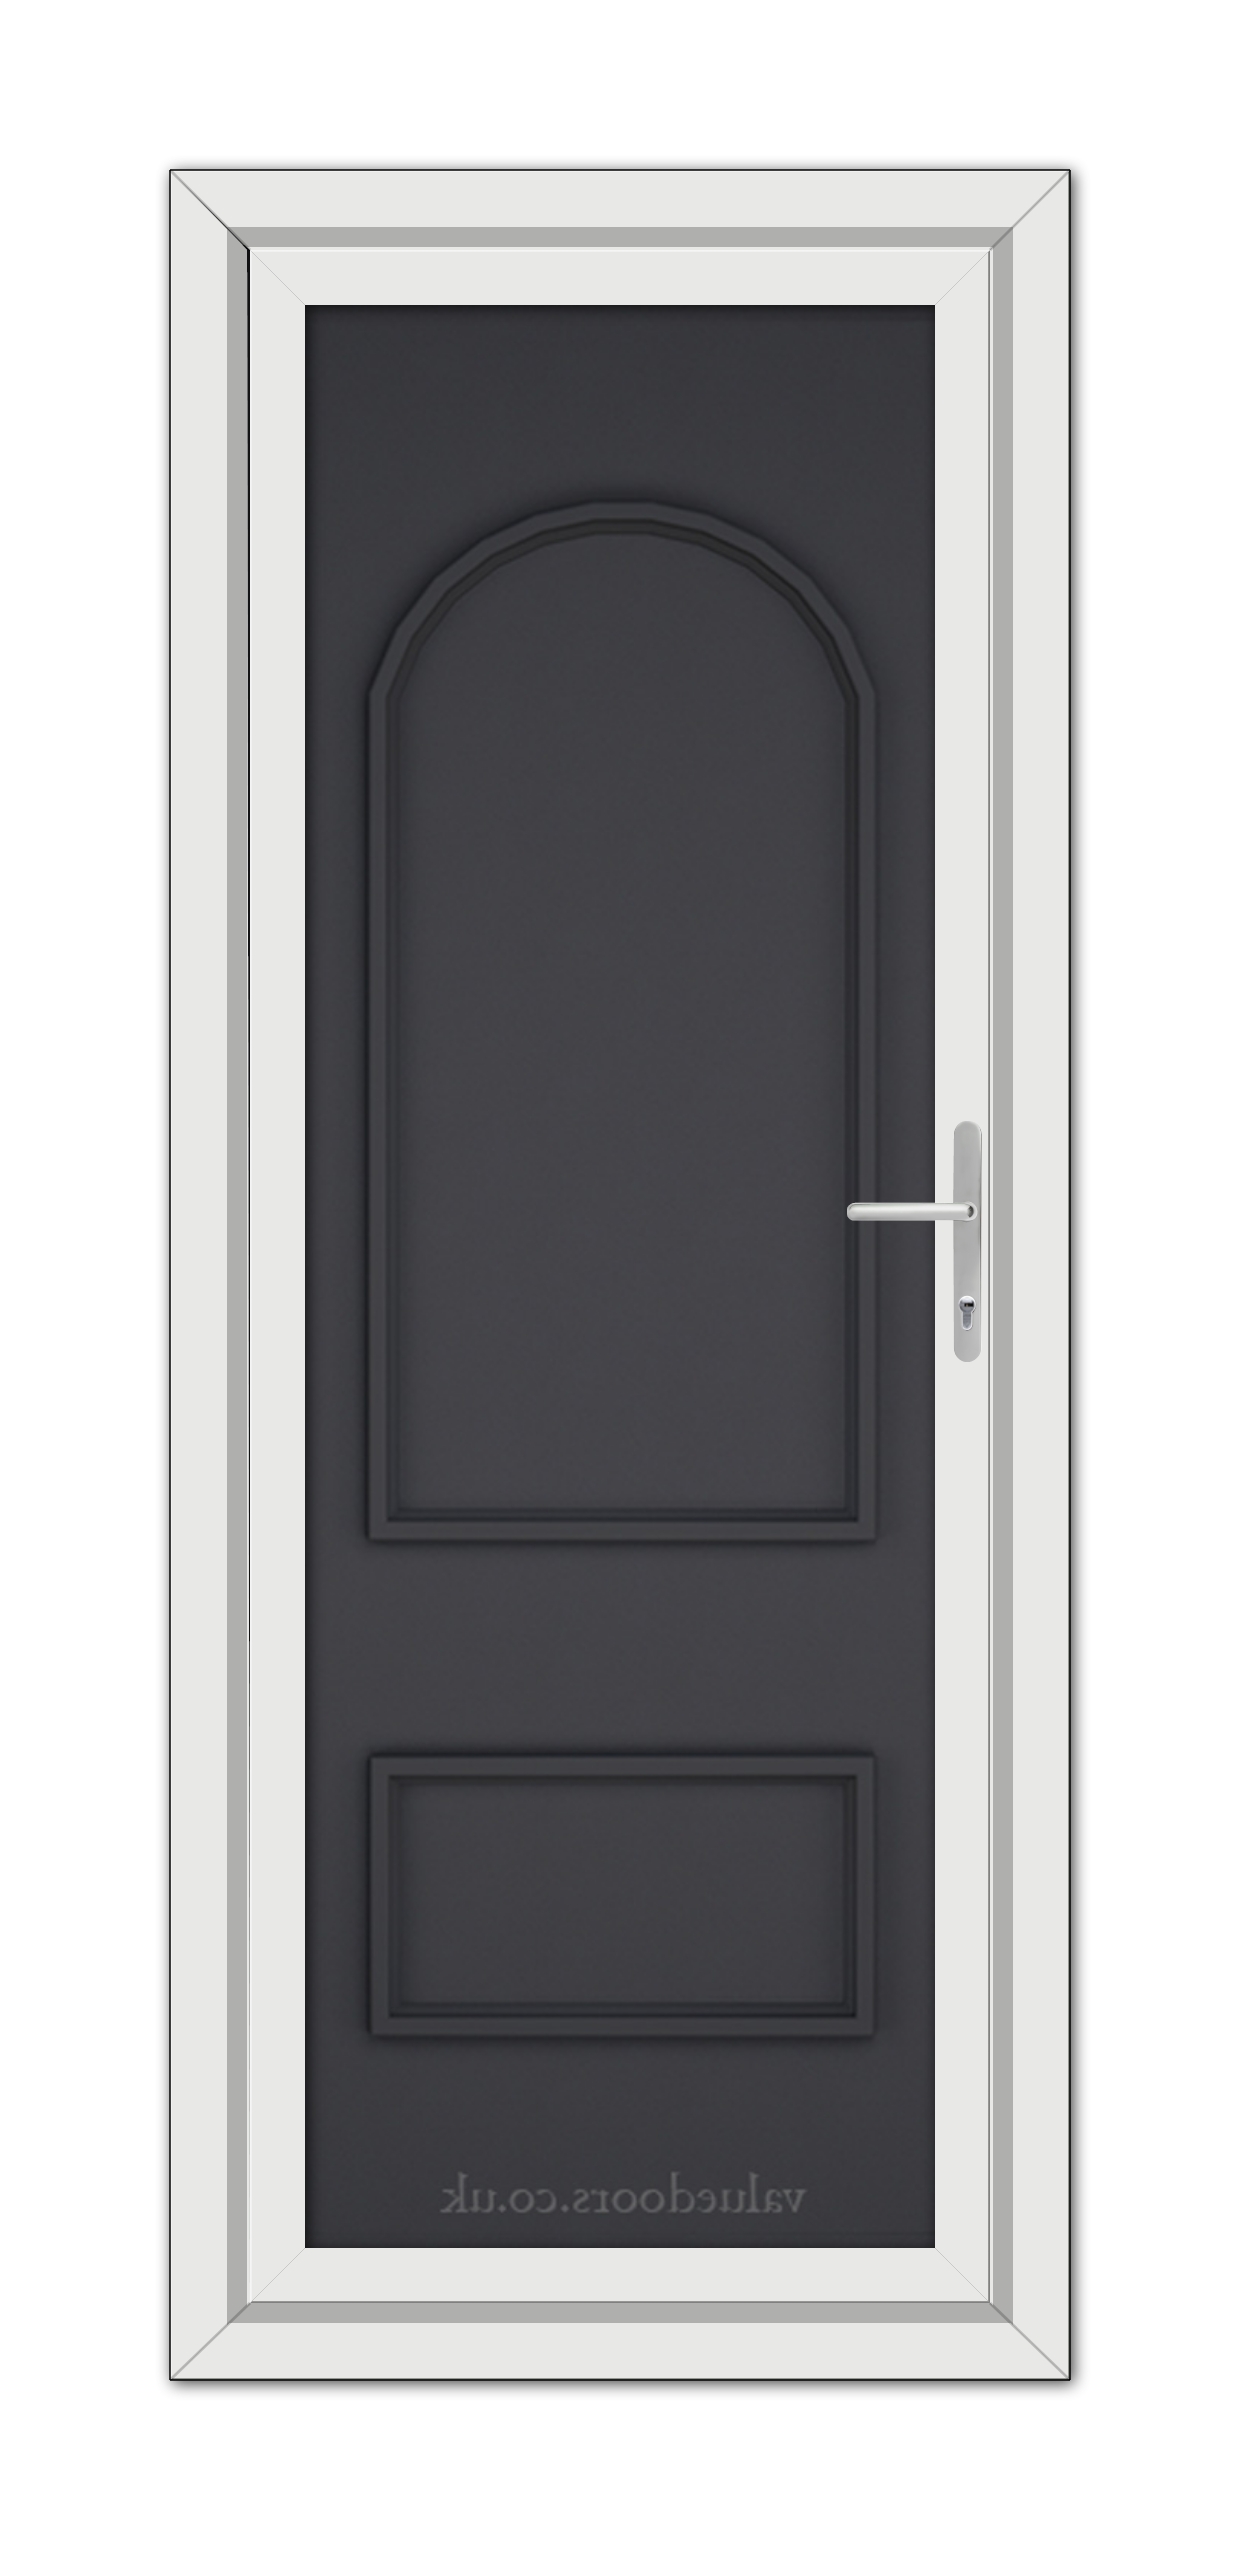 A modern Grey Rockingham Solid uPVC door with a silver handle, set within a white door frame, viewed from the front.